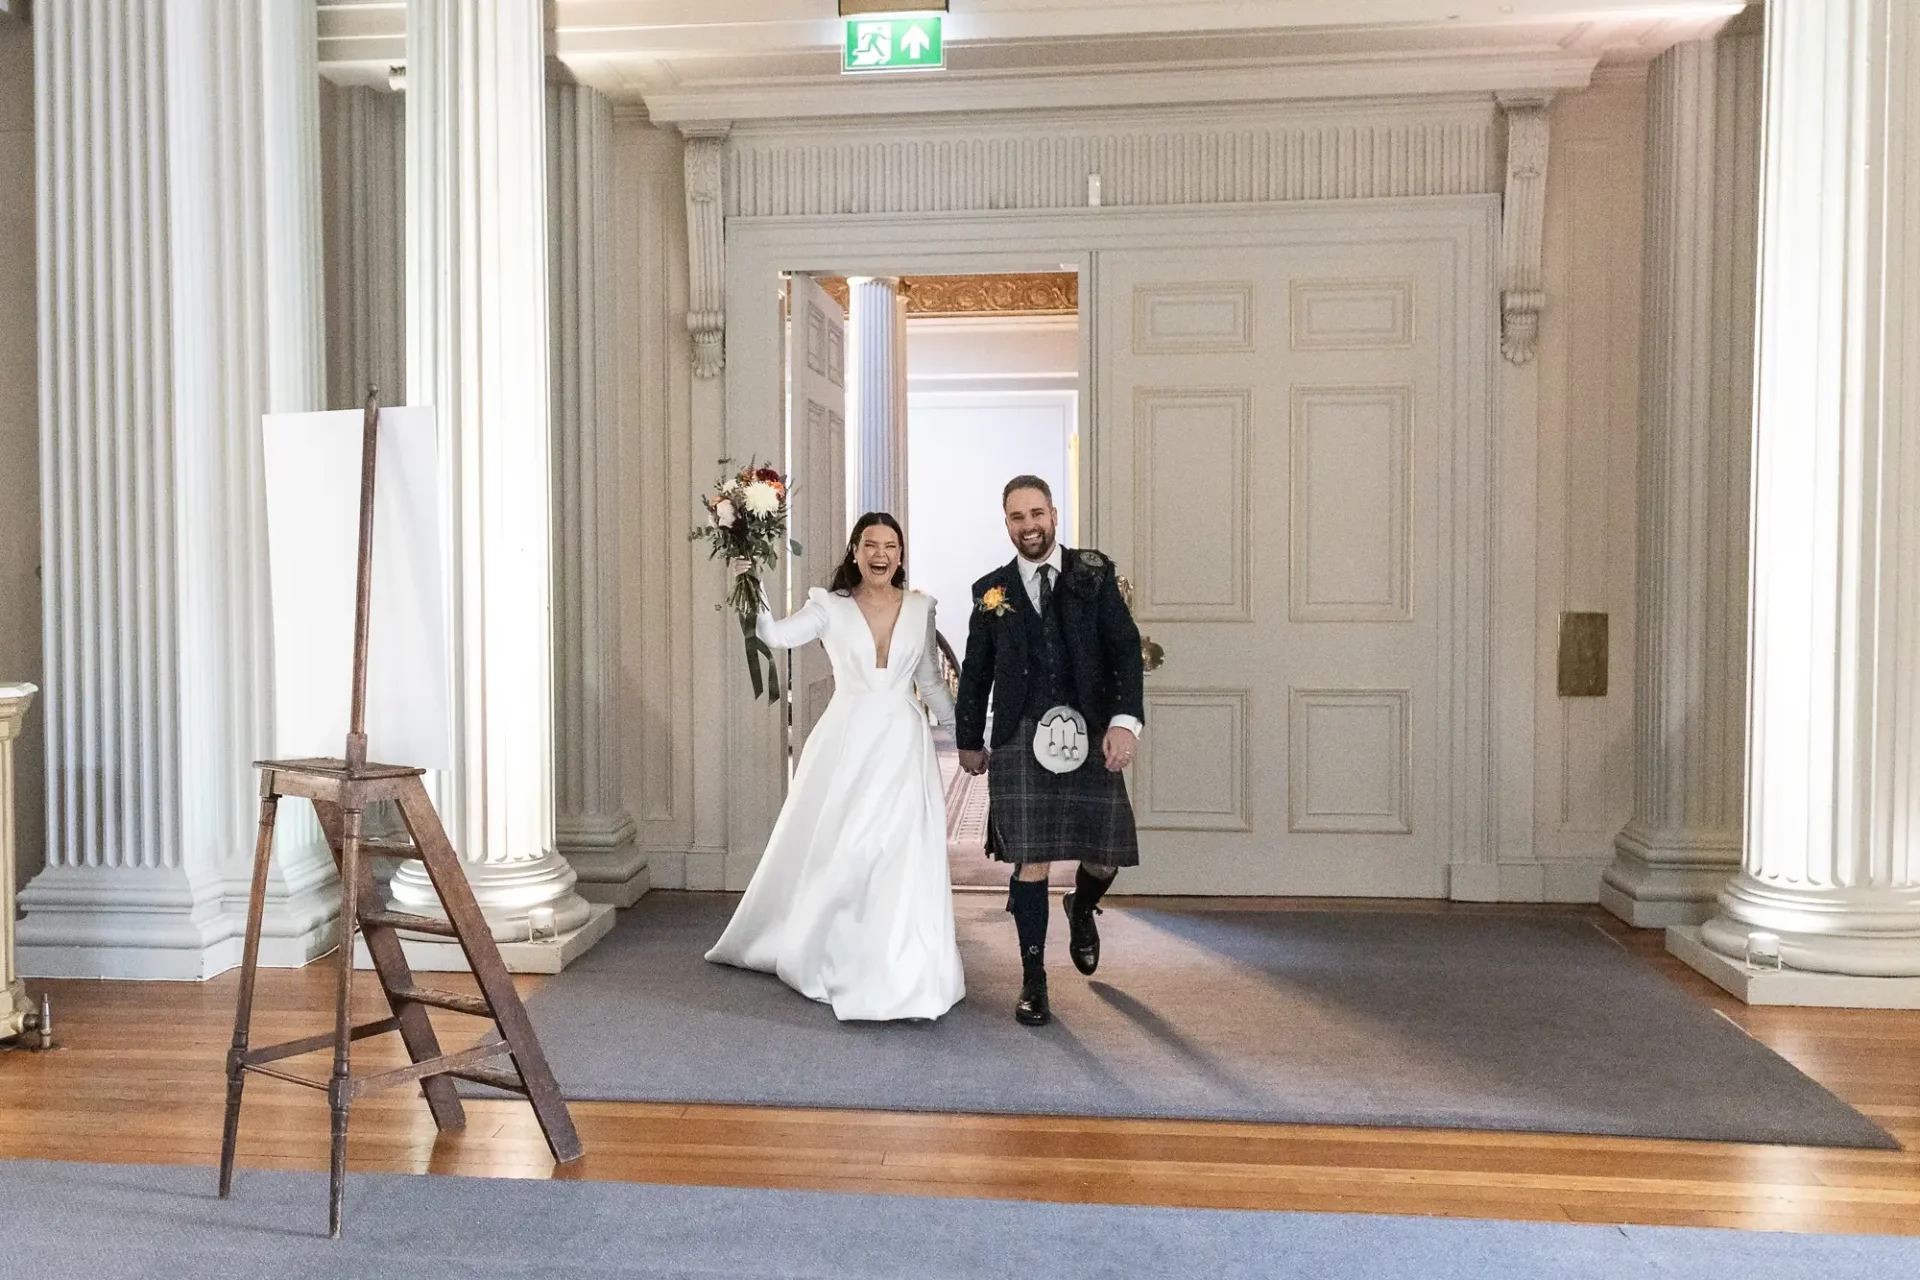 A bride in a white gown and a groom in a kilt holding hands and walking joyfully through an elegant room with classical architecture.